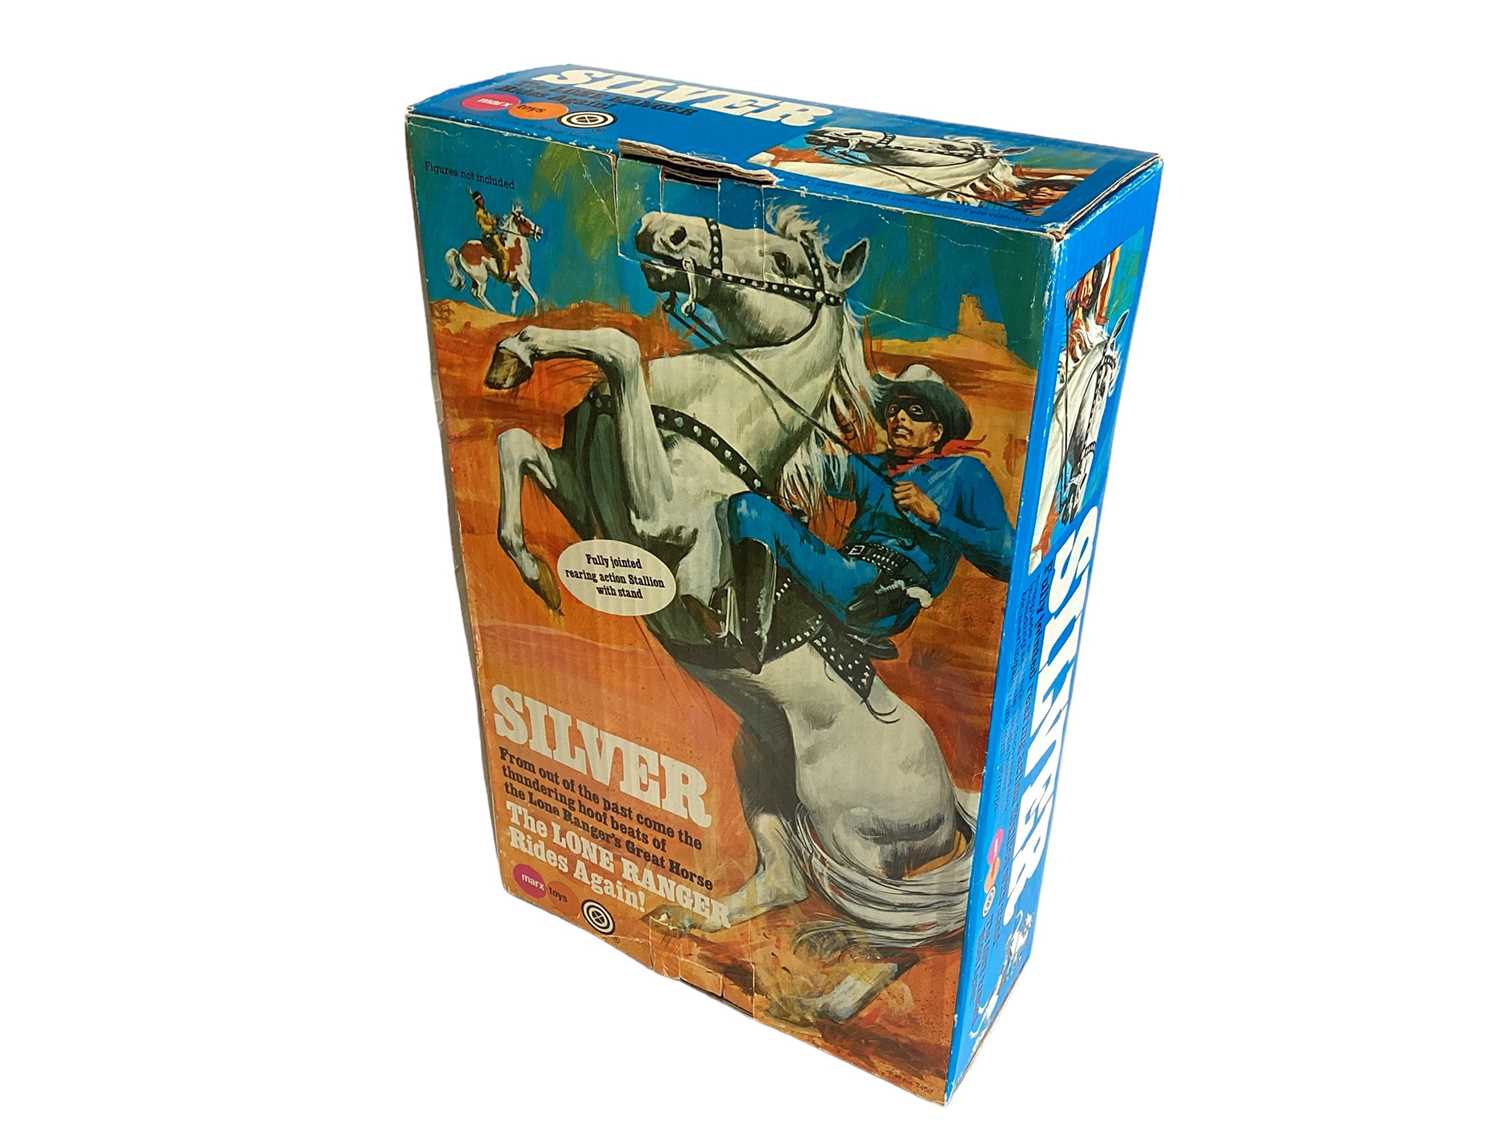 Marx Toys (c1973) The Lone Ranger Rides Again Silver, Lone Ranger's great horse, with accessories, b